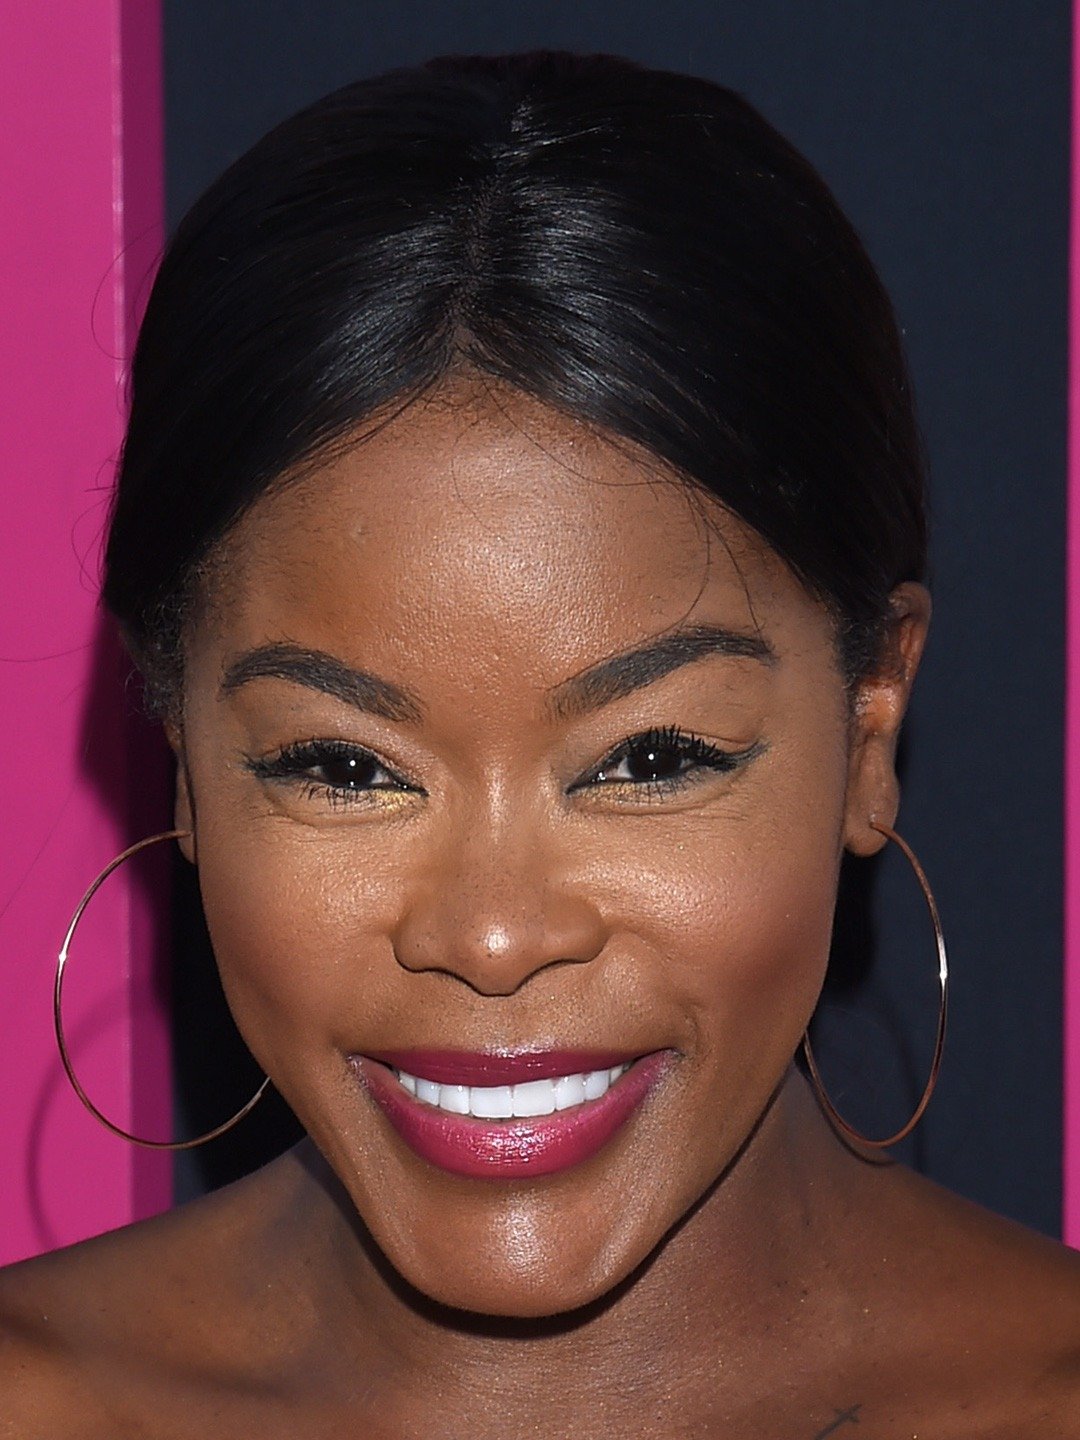 How tall is Golden Brooks?